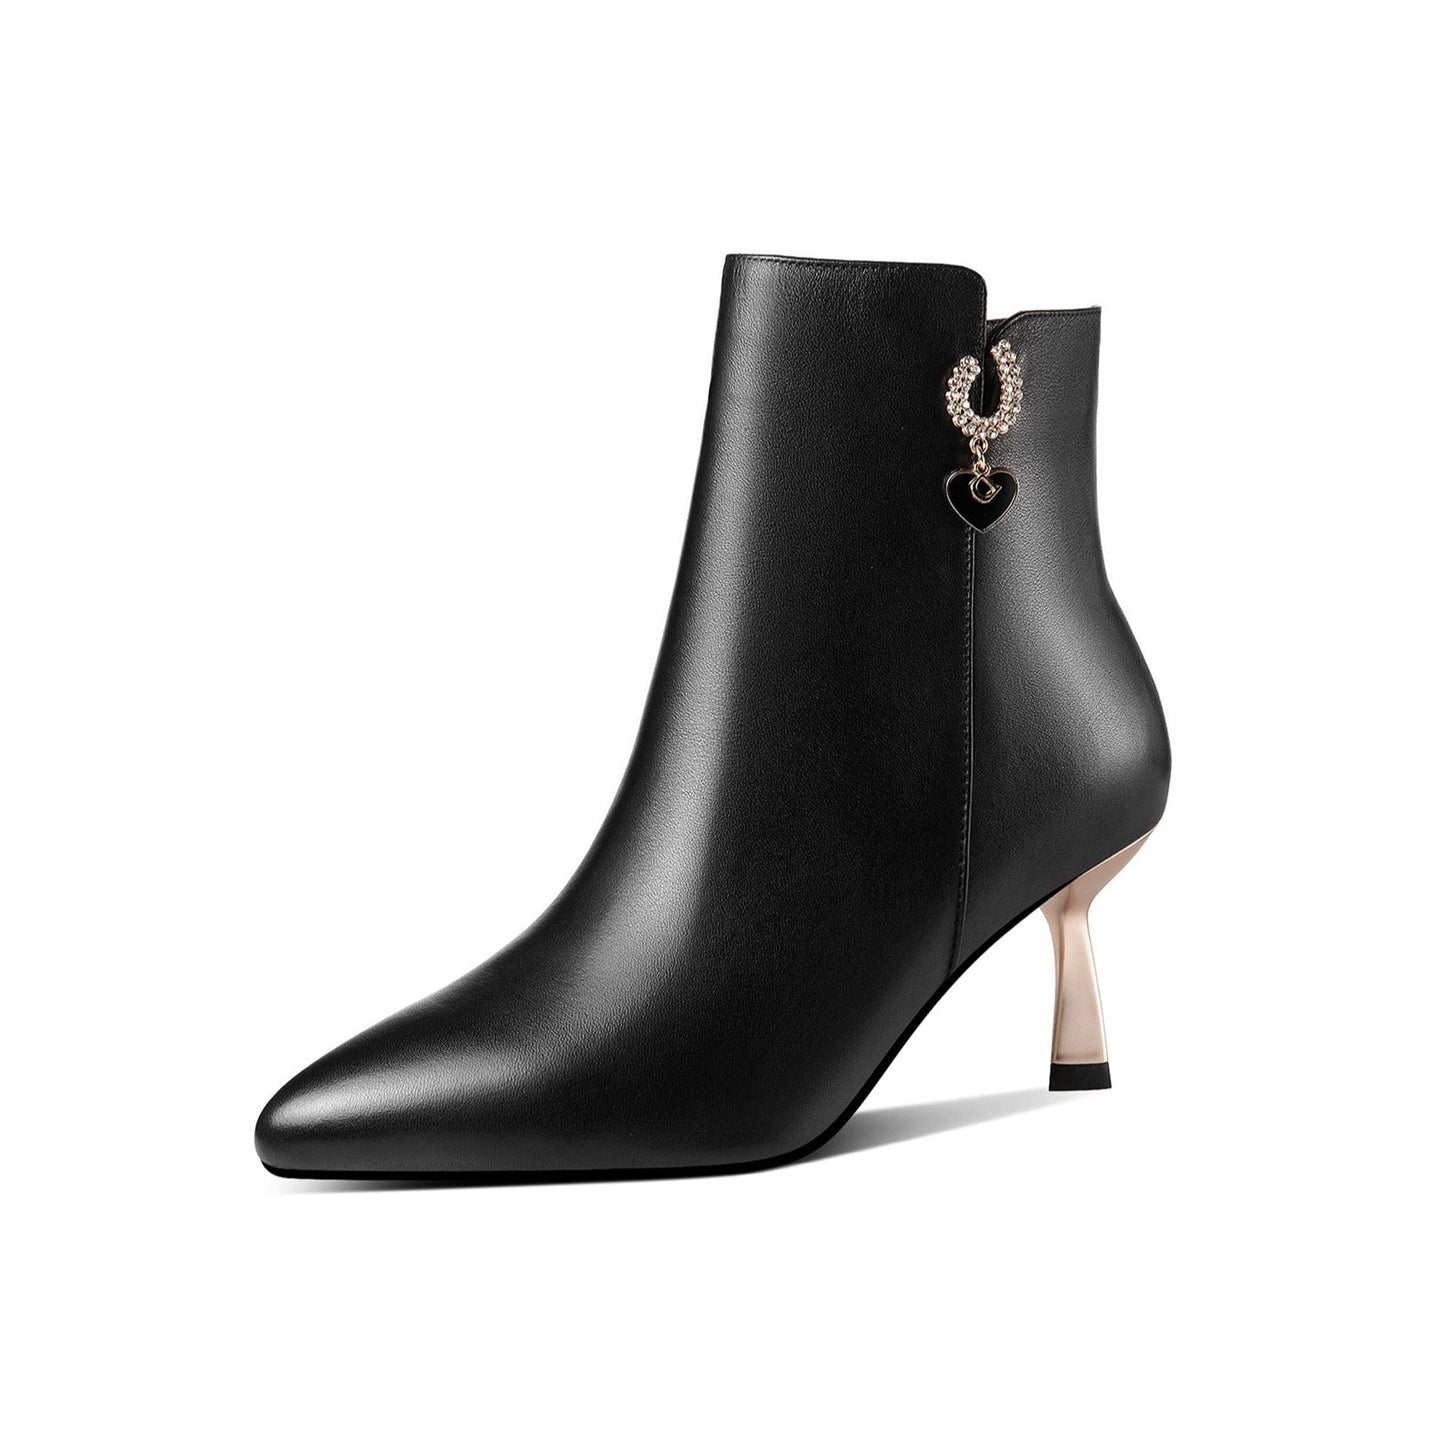 TinaCus Genuine Leather Handmade Women's Metal Heel Side Zip Up Pointed Toe Heart Pendant Ankle Boots